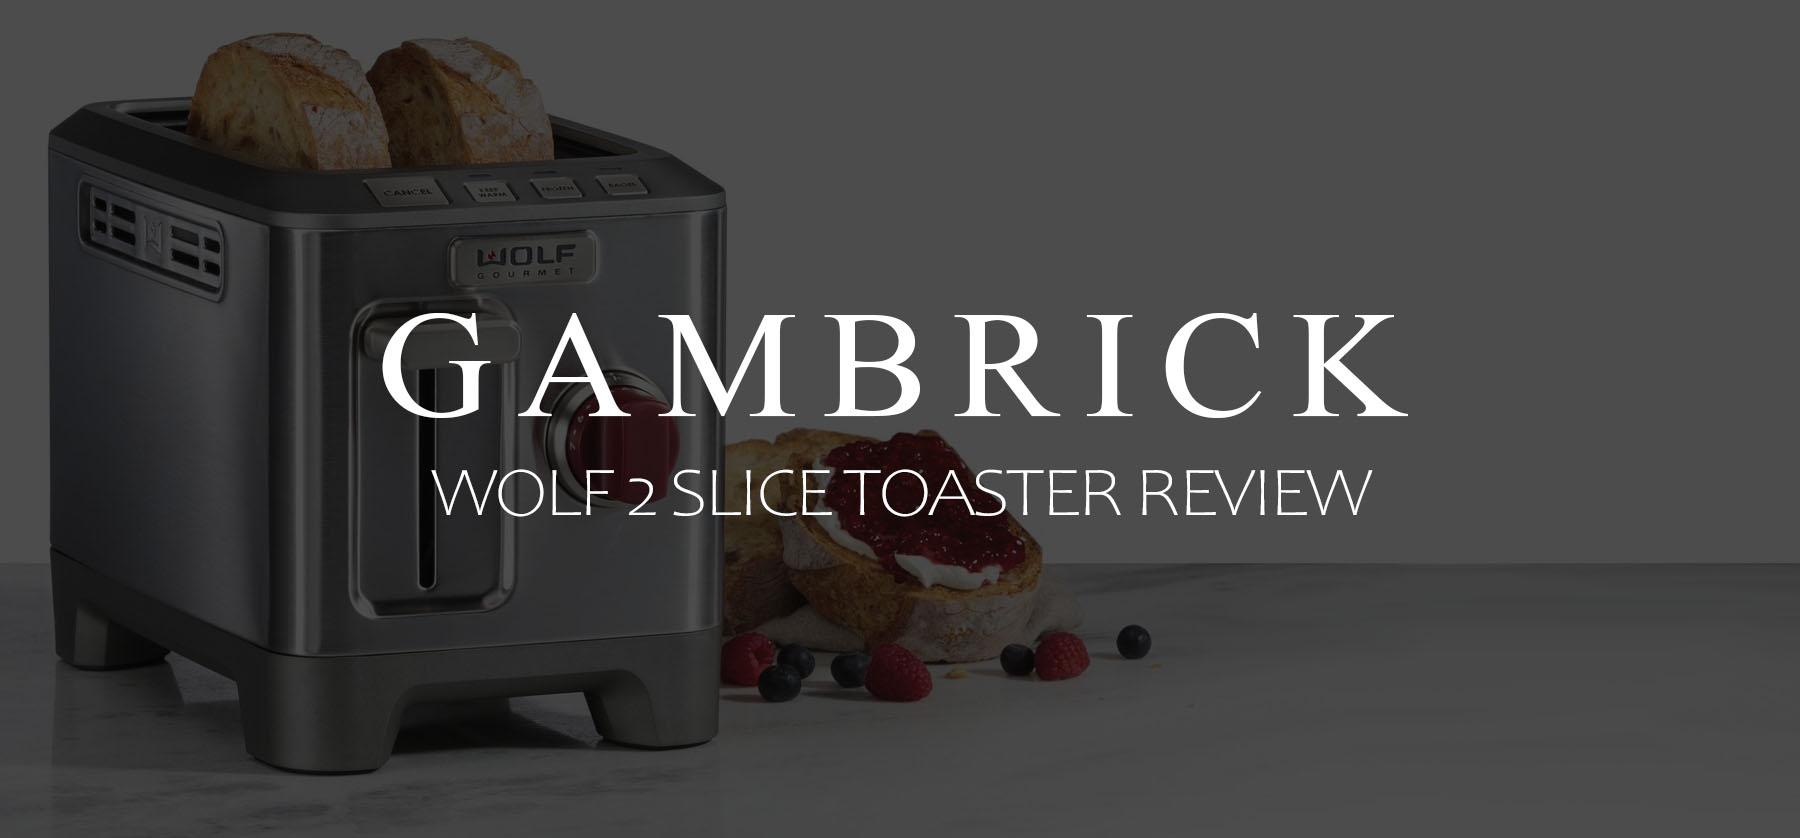 Wolf 2 slice toaster review banner 1